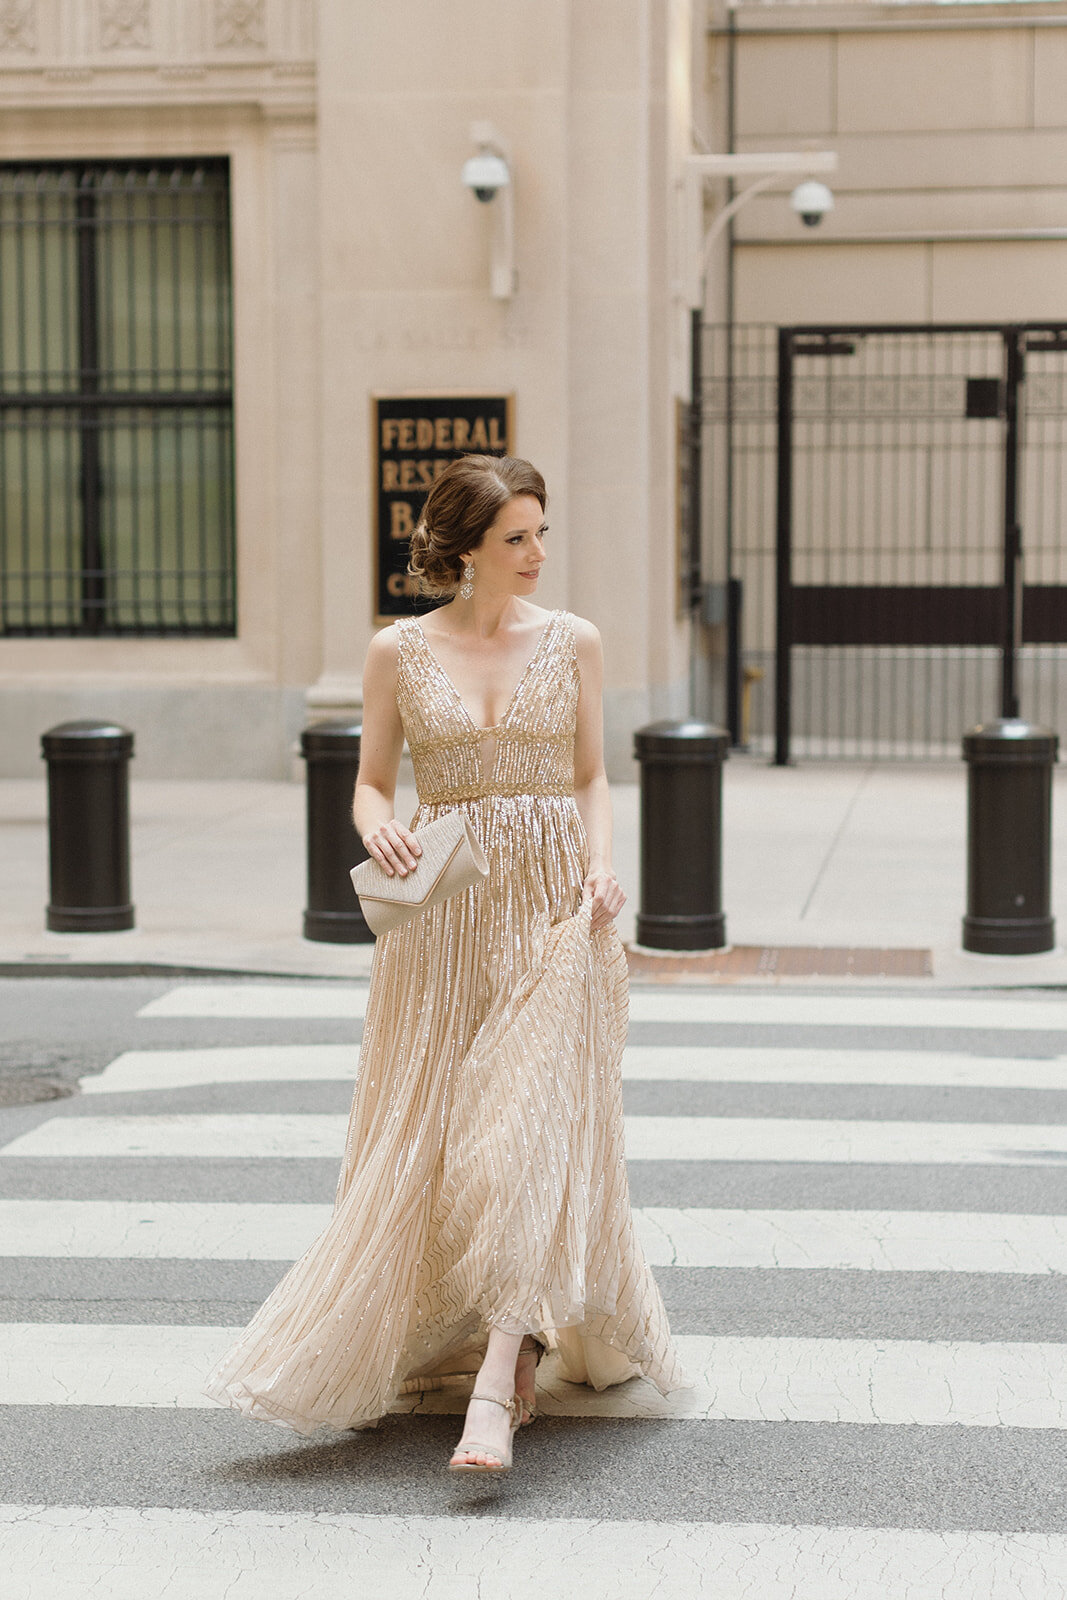 woman walking in crosswalk in gold sparkly gown and holding a clutch. She is holding up her gown and looking off to the side.